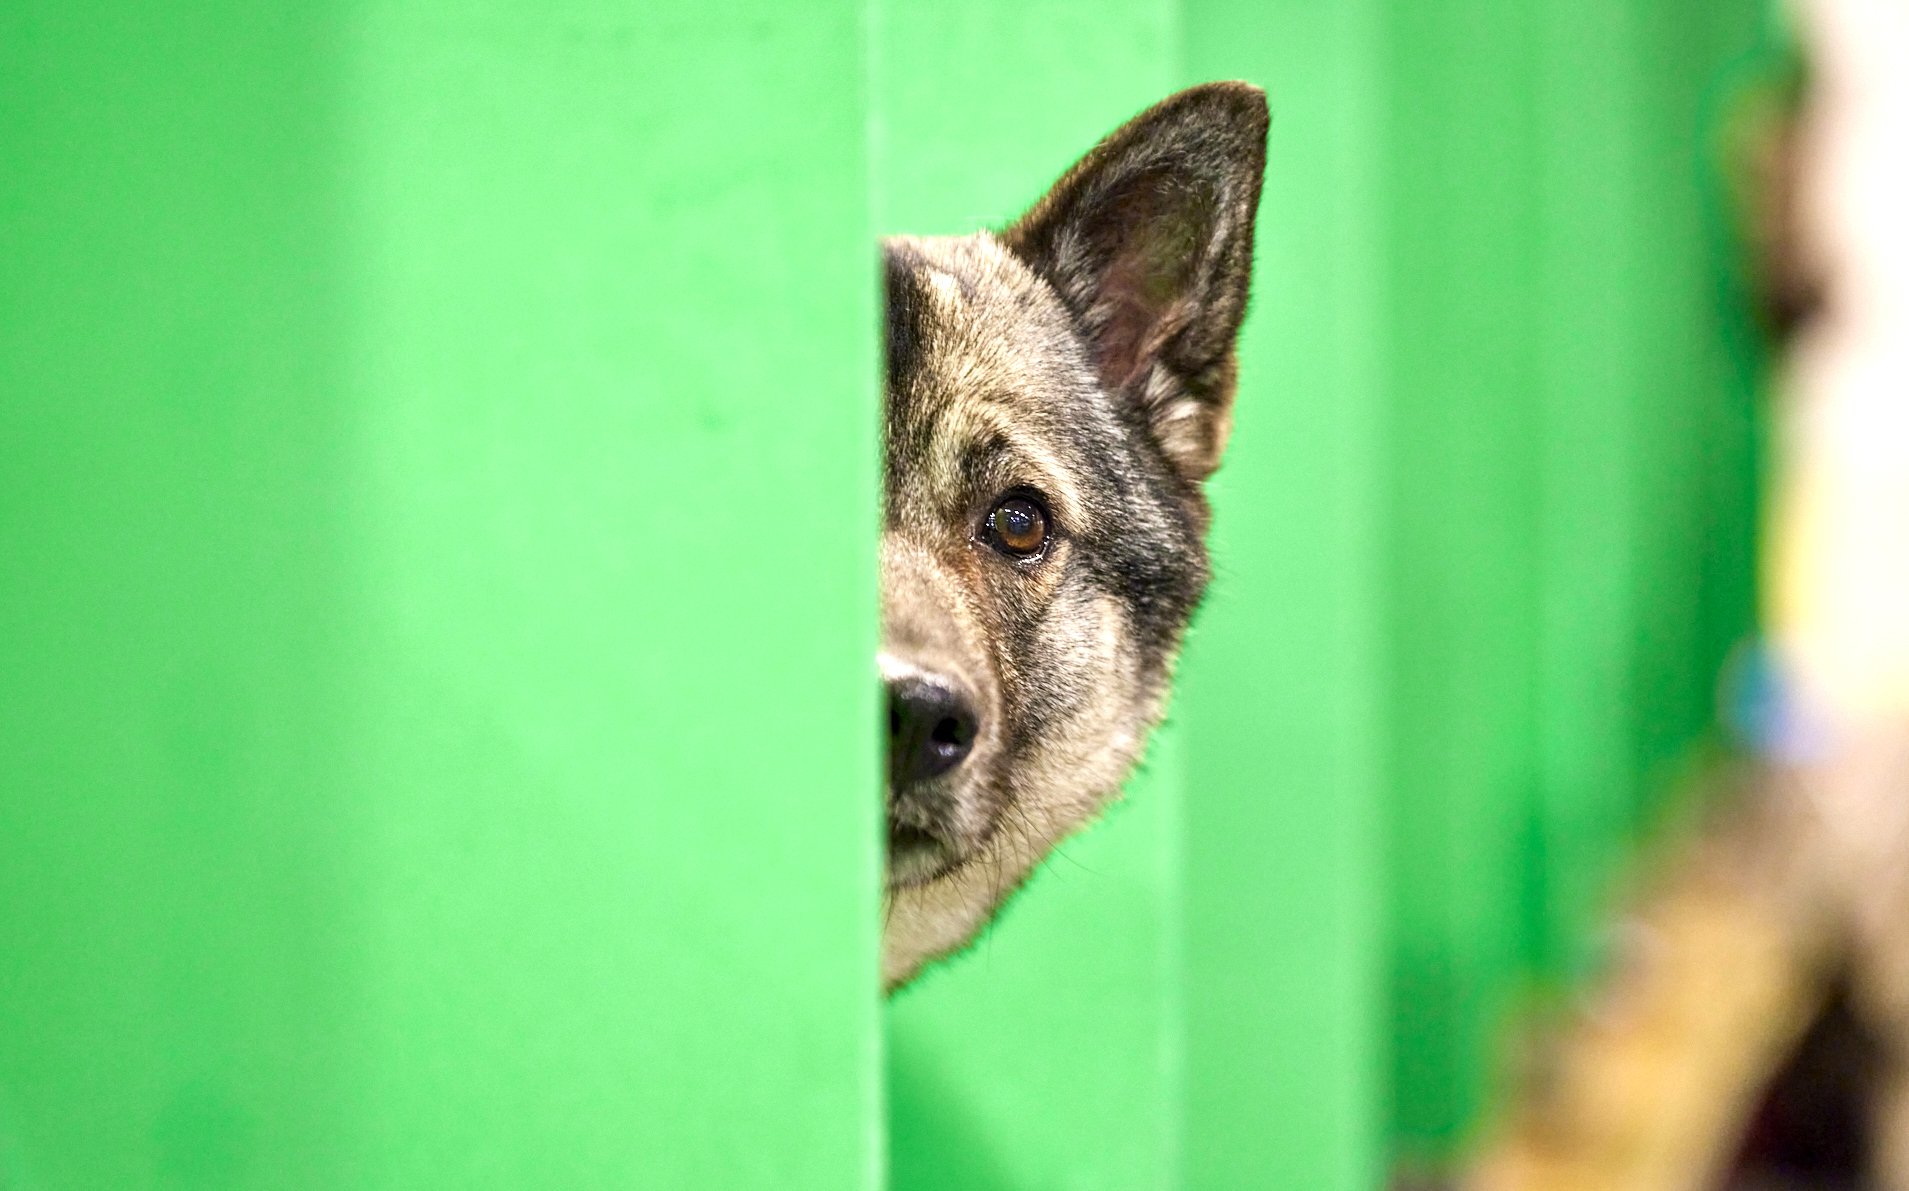  {dats} Copyright: Flick.digitalFree for editorial use image, please credit: Dave Phillips/ Flick.digitalNorwegian Elkhound at Crufts 2022 at the NEC in Birmingham today.The world’s greatest dog show, Crufts, is taking place from 10th – 13th March at